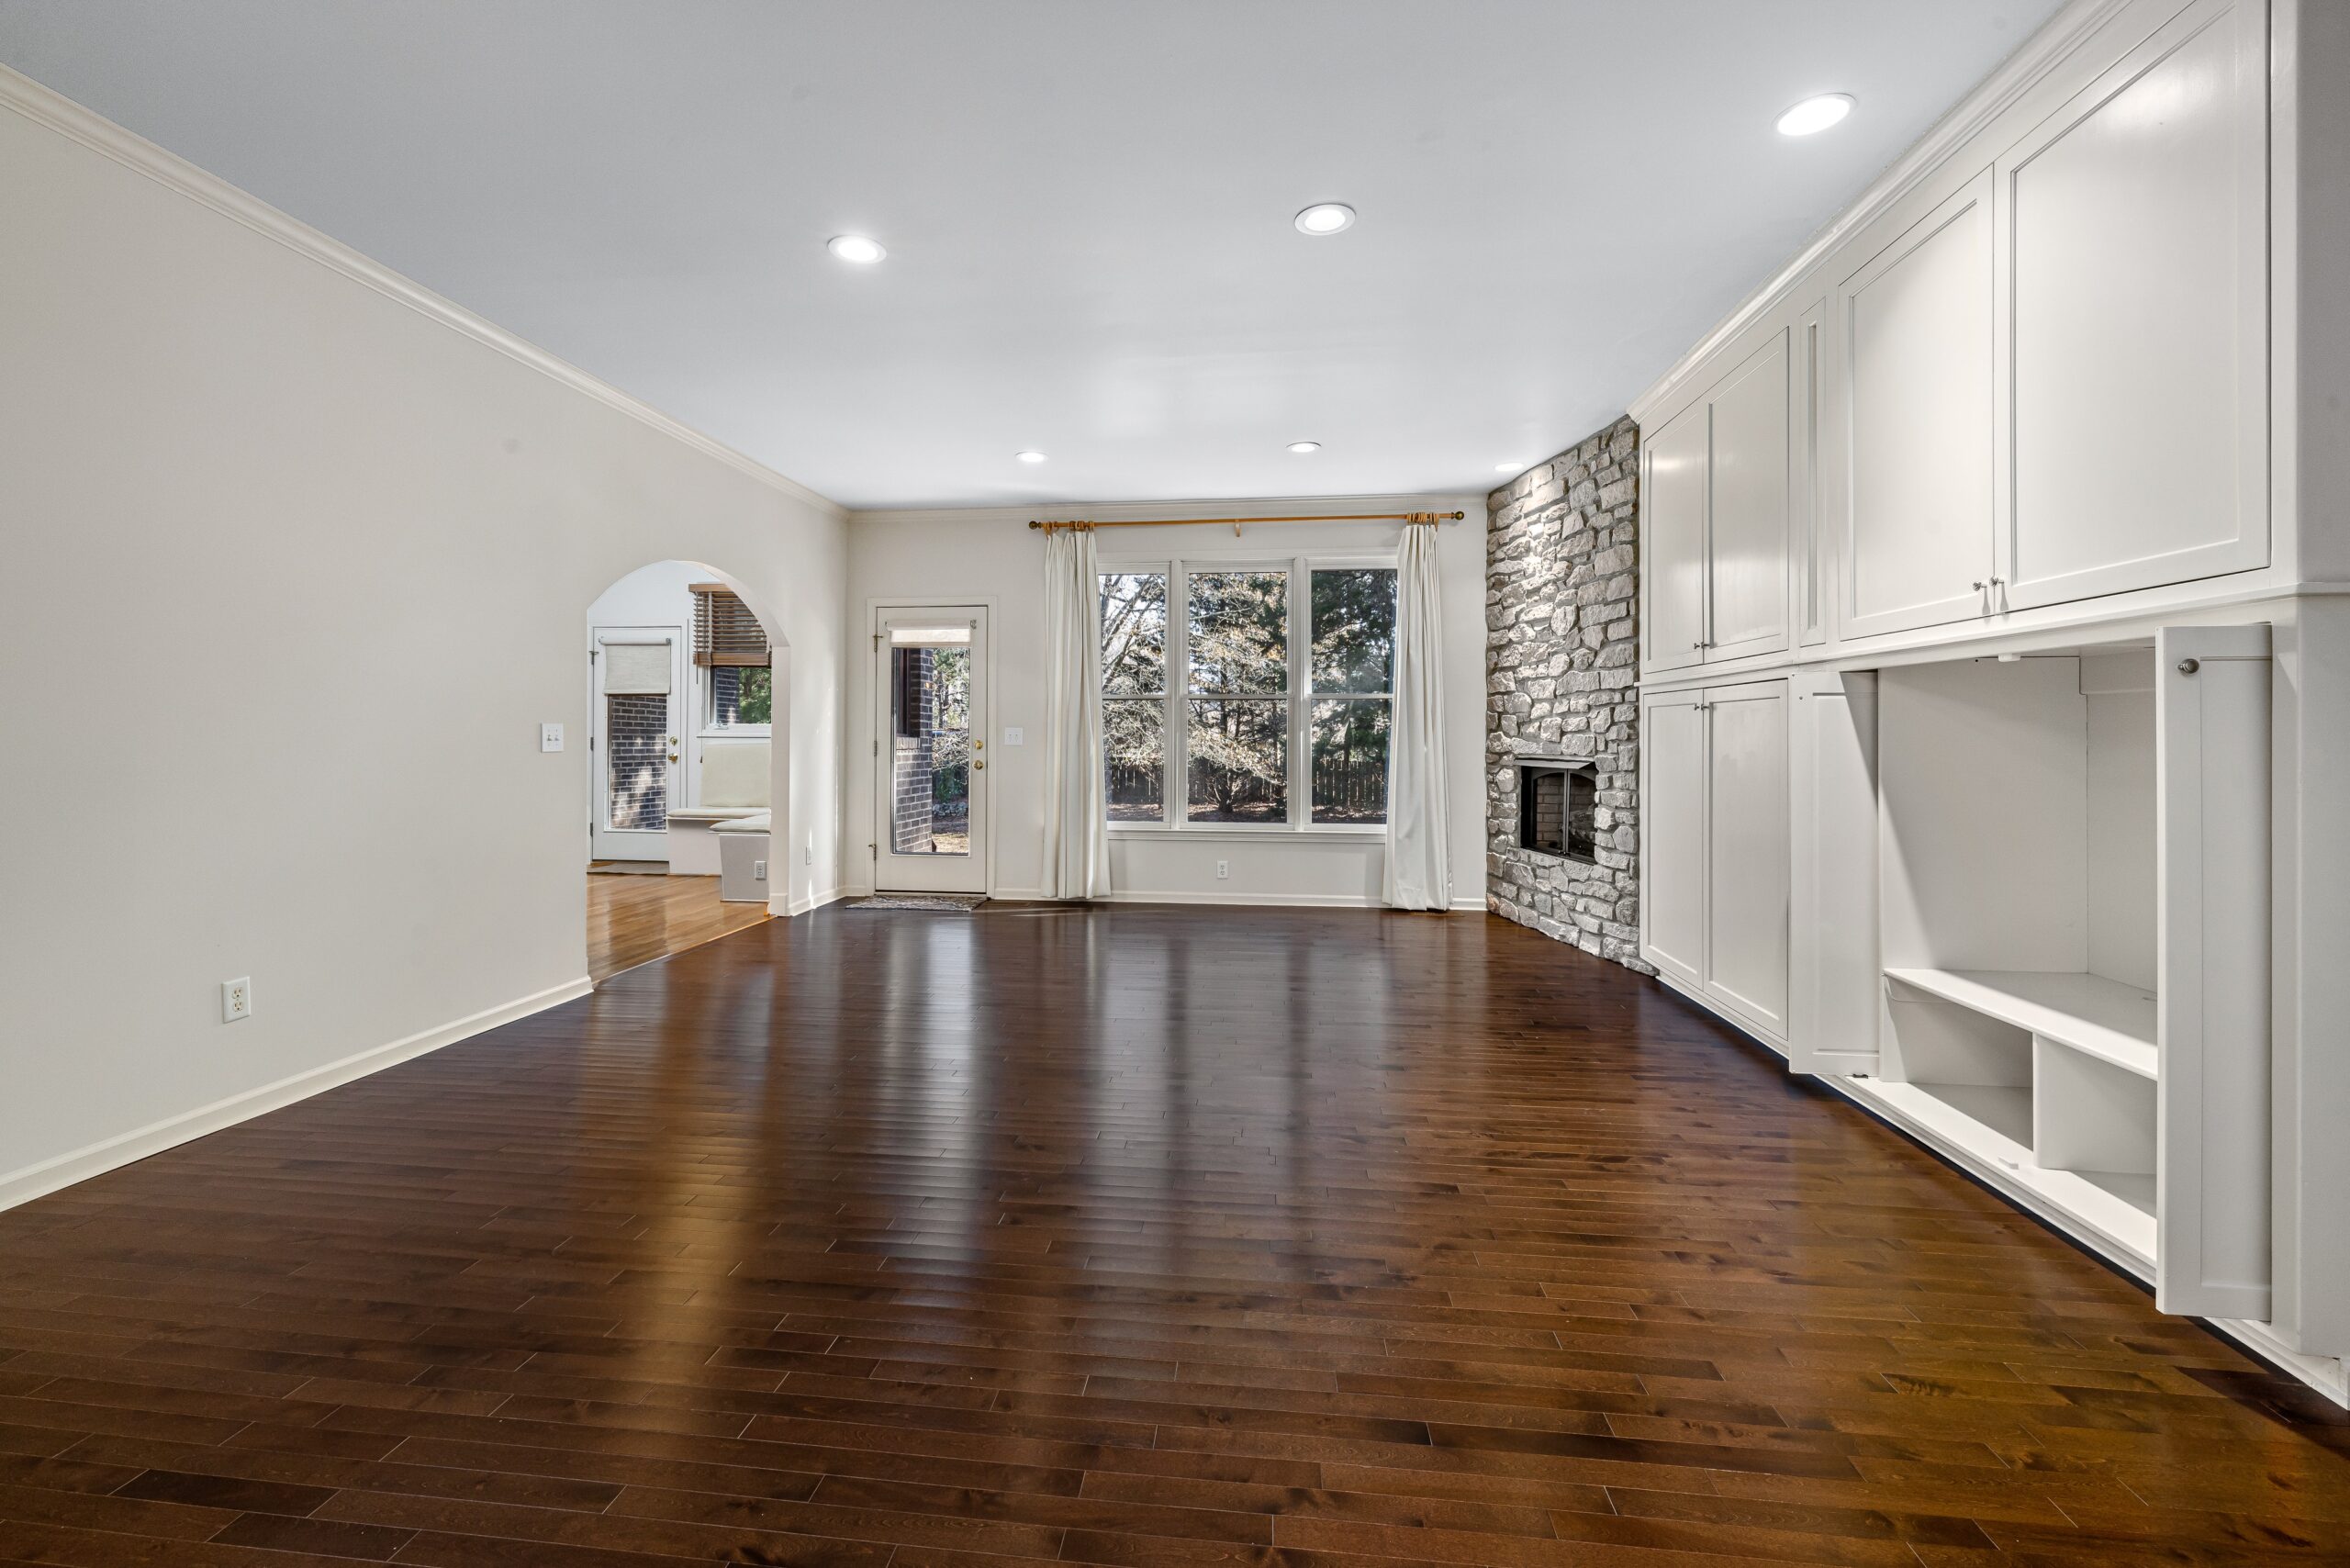 What To Do When You Move Into A Home With Hardwood Flooring